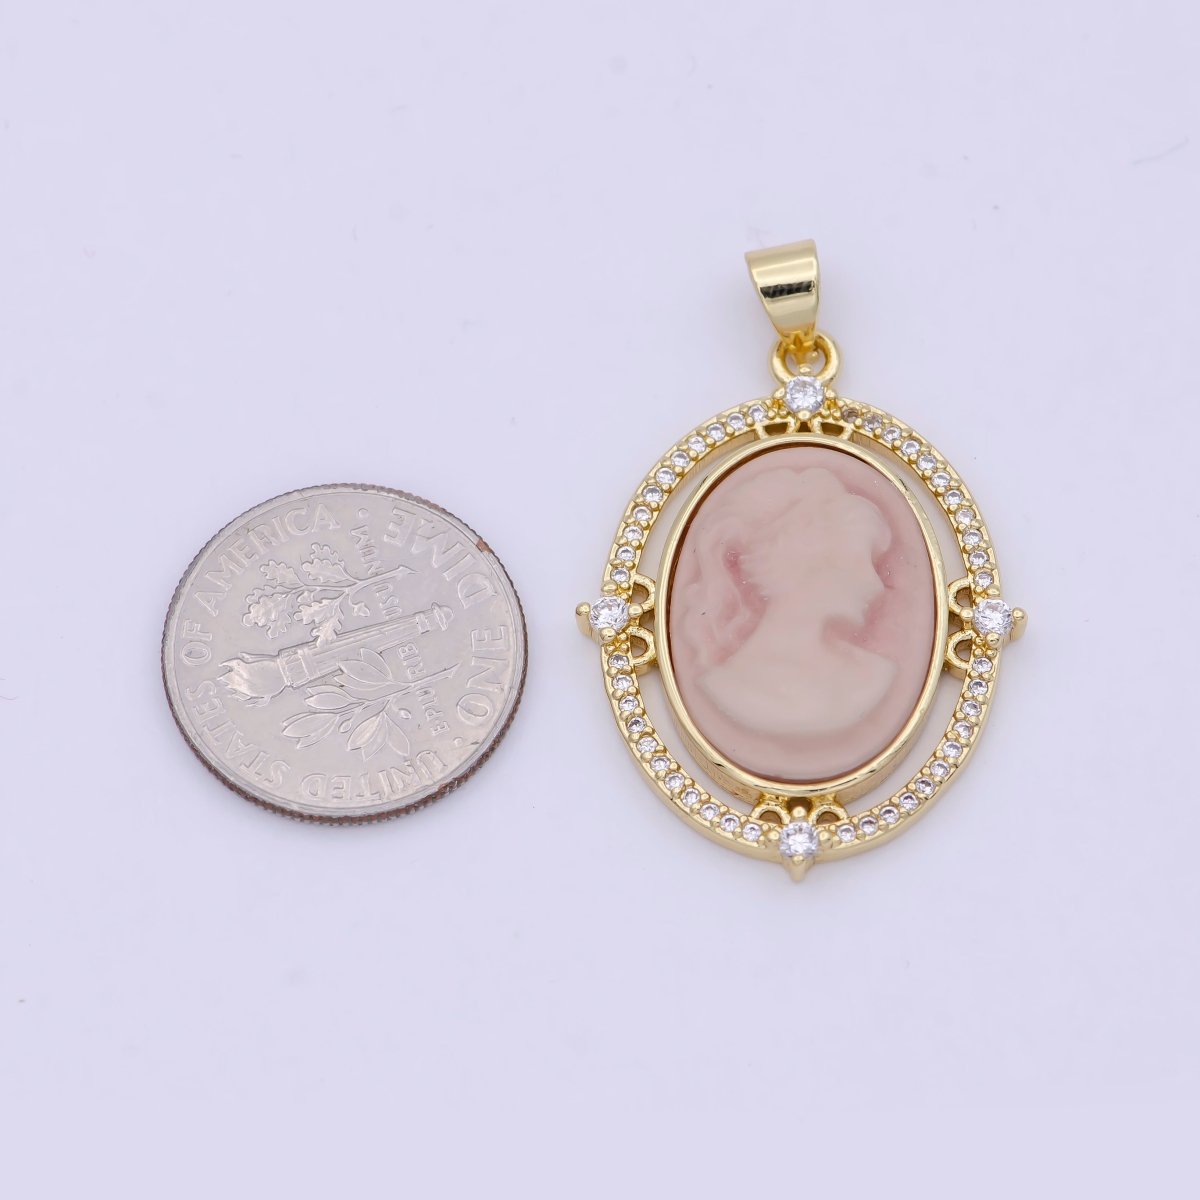 24K Gold Filled Micro Paved CZ Blue Pink Green Agate Women's Portrait Italian Cameo Victorian Vintage Pendant N-616 N-617 N-618 - DLUXCA